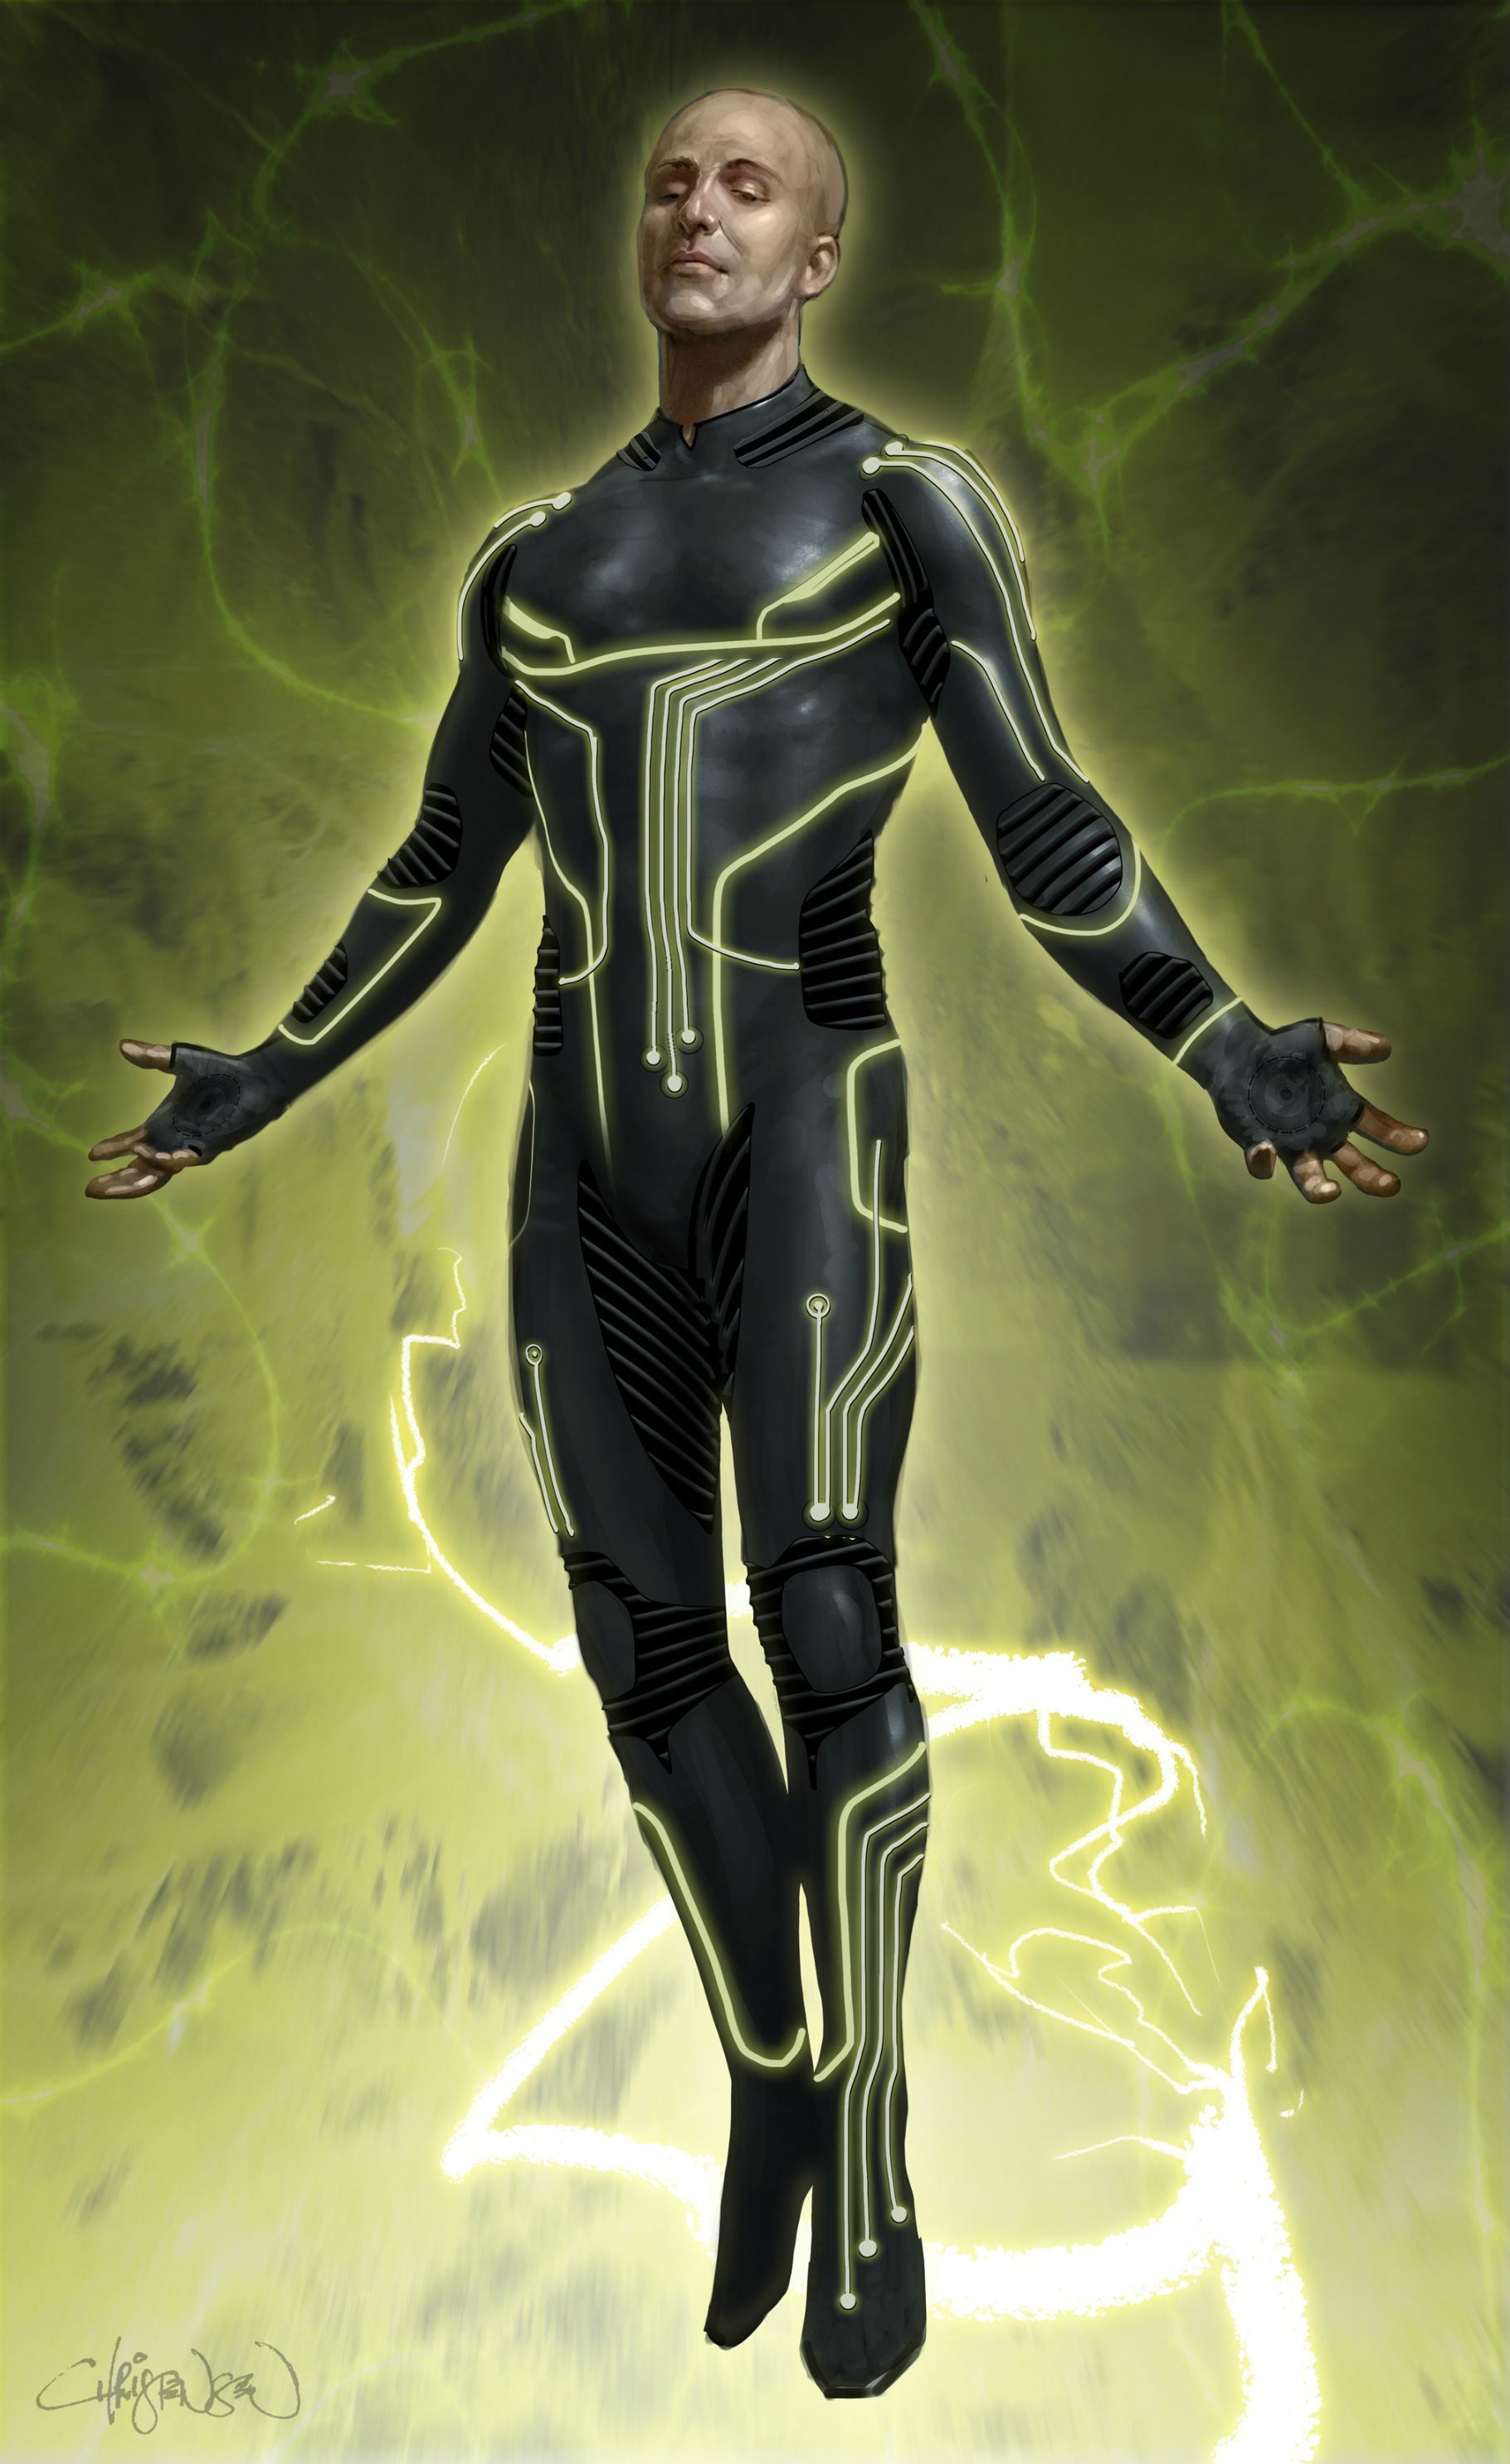 Electro Concept Art For The Amazing Spider-Man 2